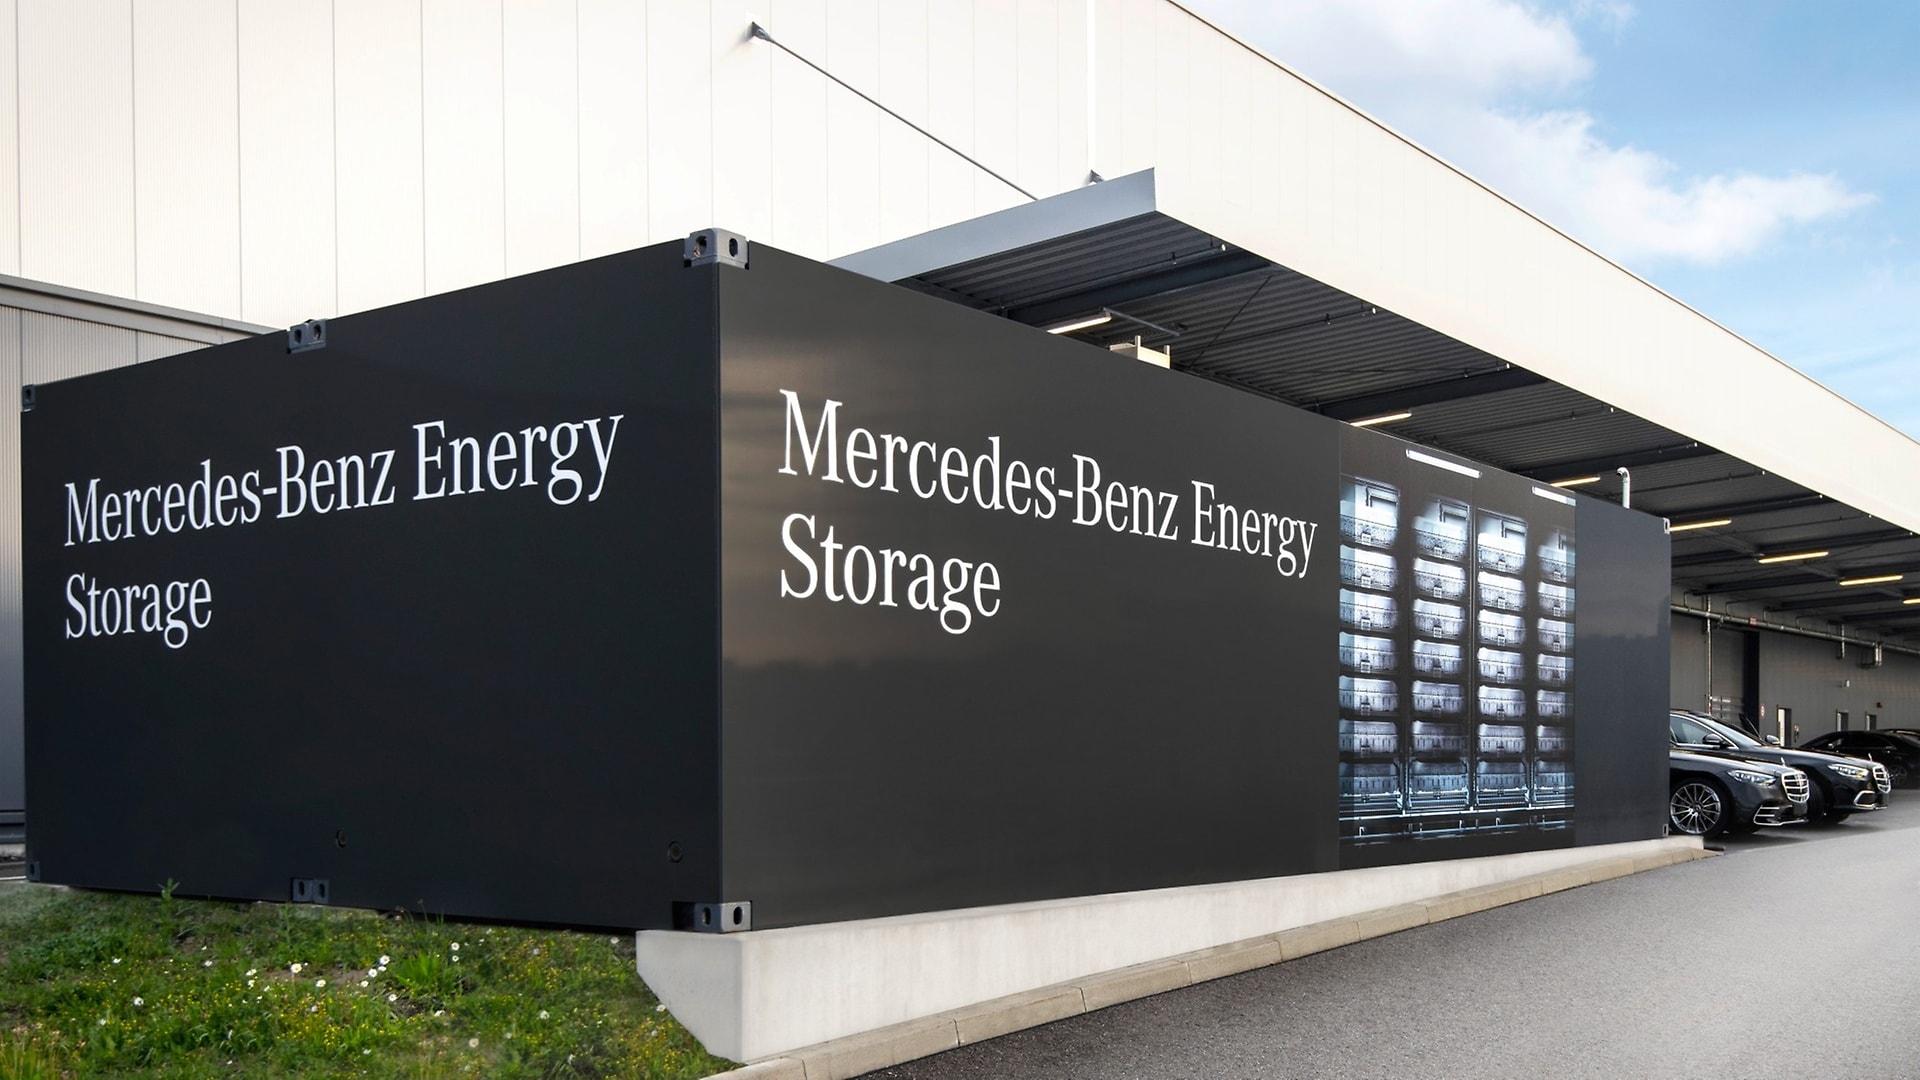 The stationary energy storage of Mercedes-Benz Energy GmbH at the Factory 56 in Sindelfingen.